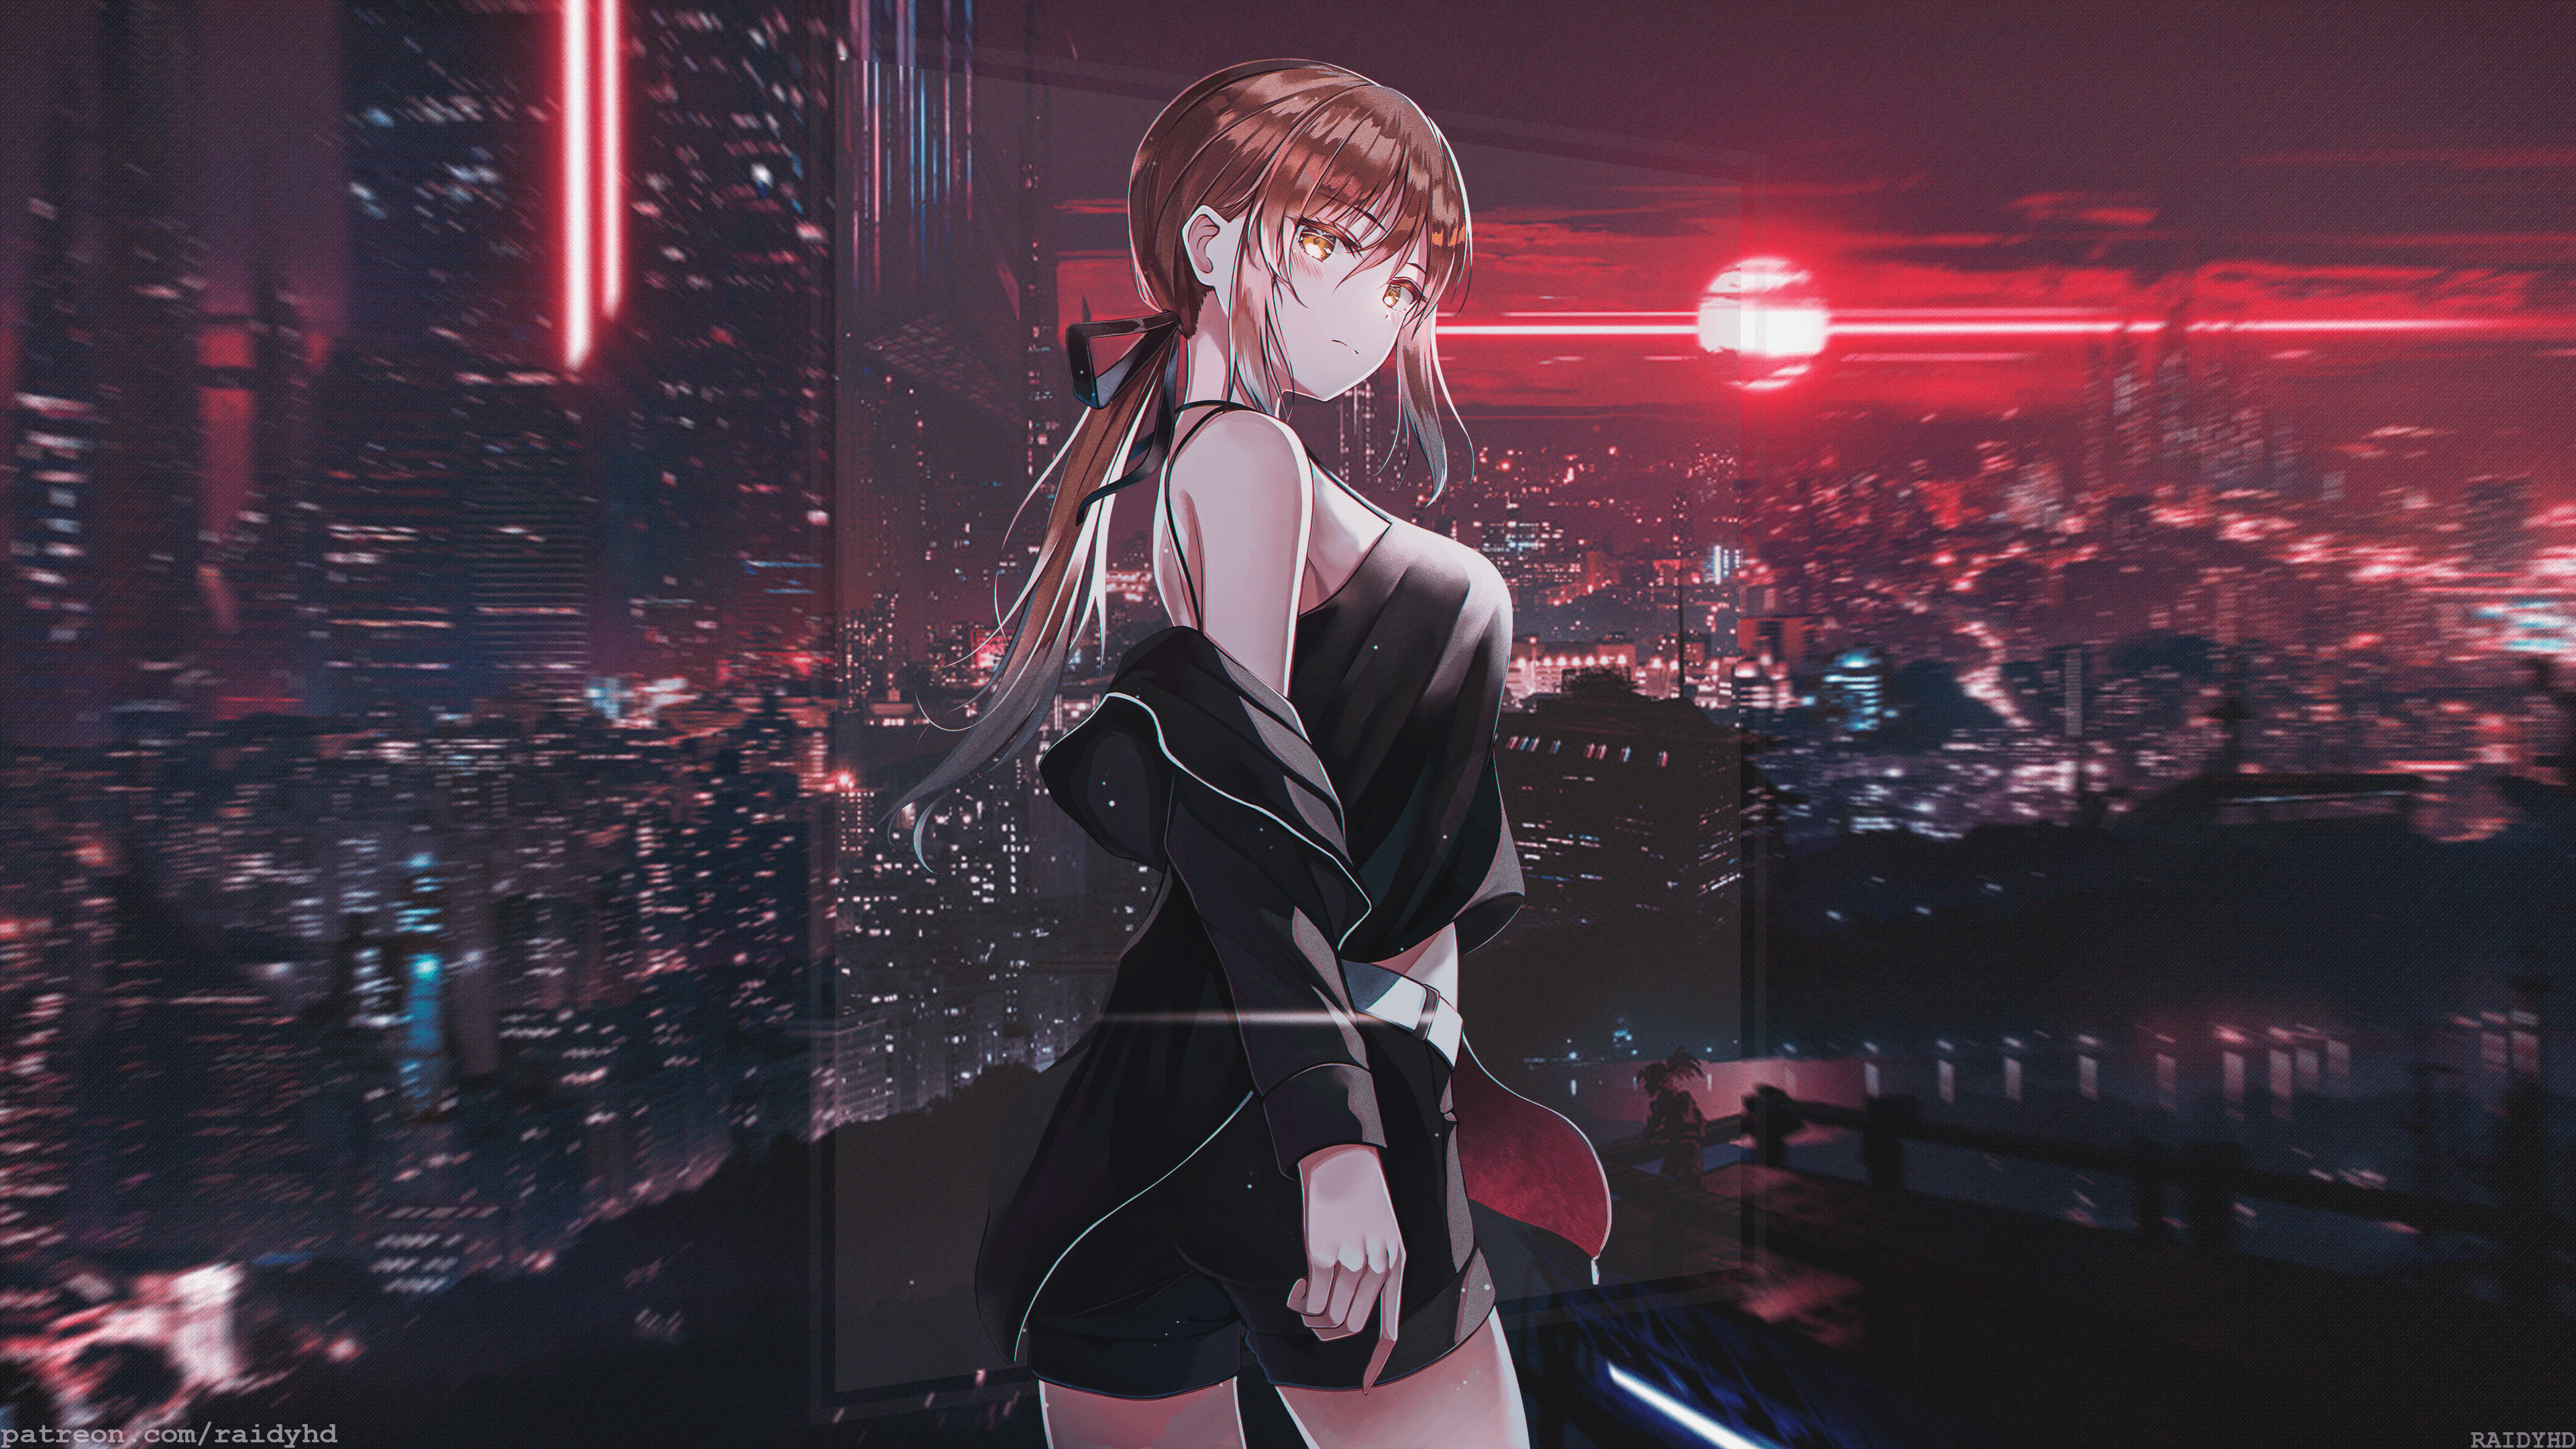 Anime 3840x2160 anime anime girls picture-in-picture brunette city lights shorts ponytail